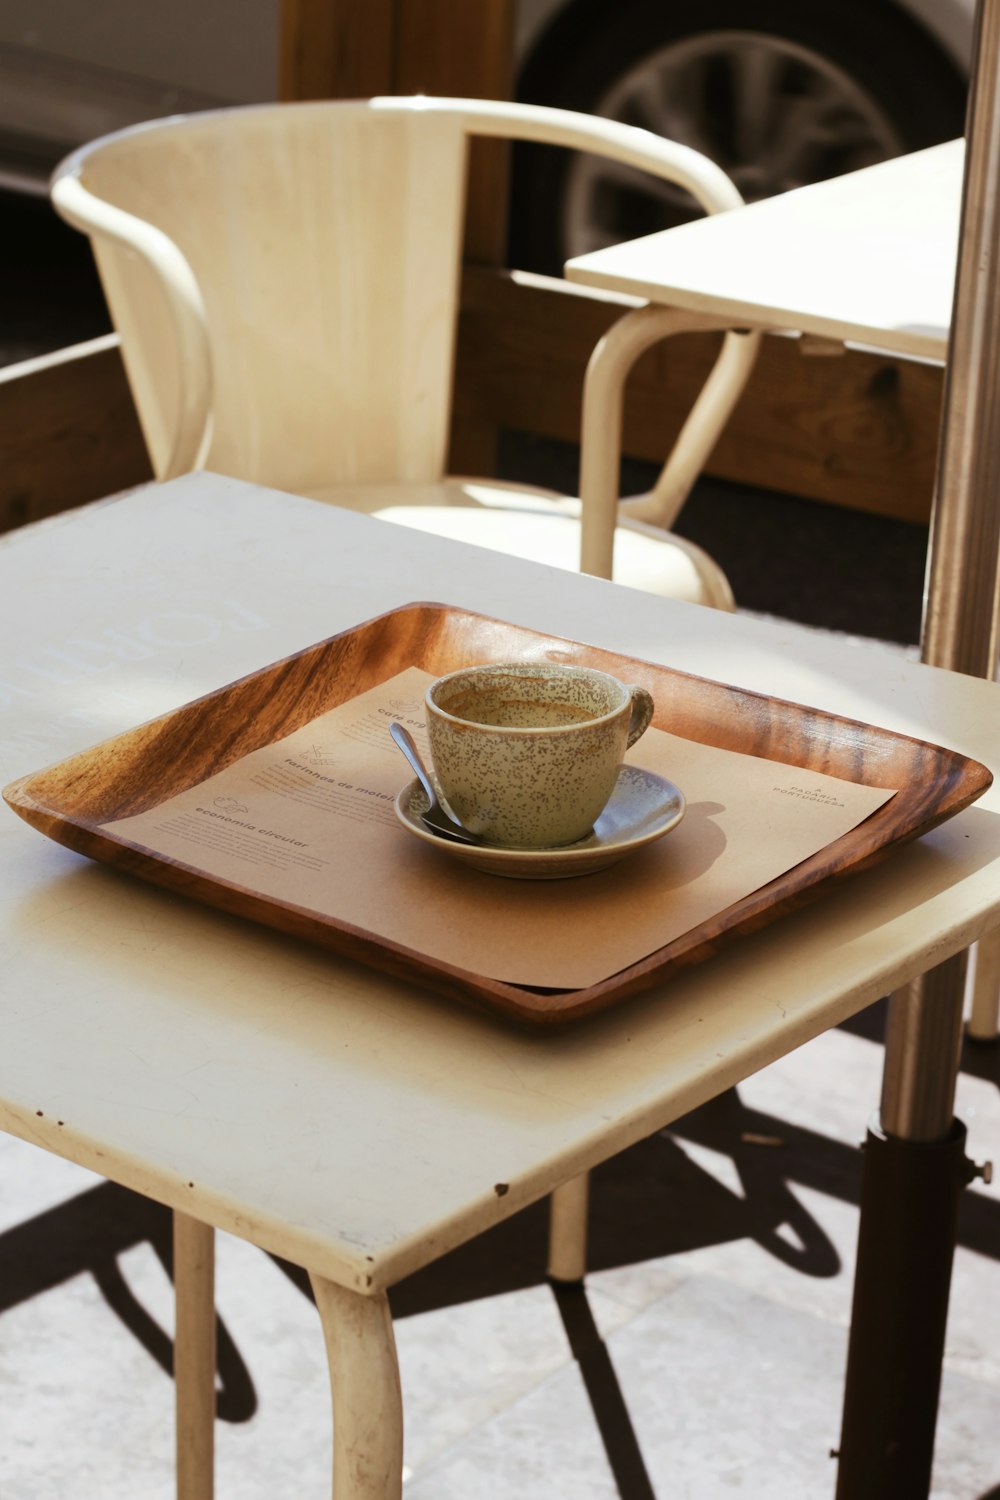 a cup of coffee on a table